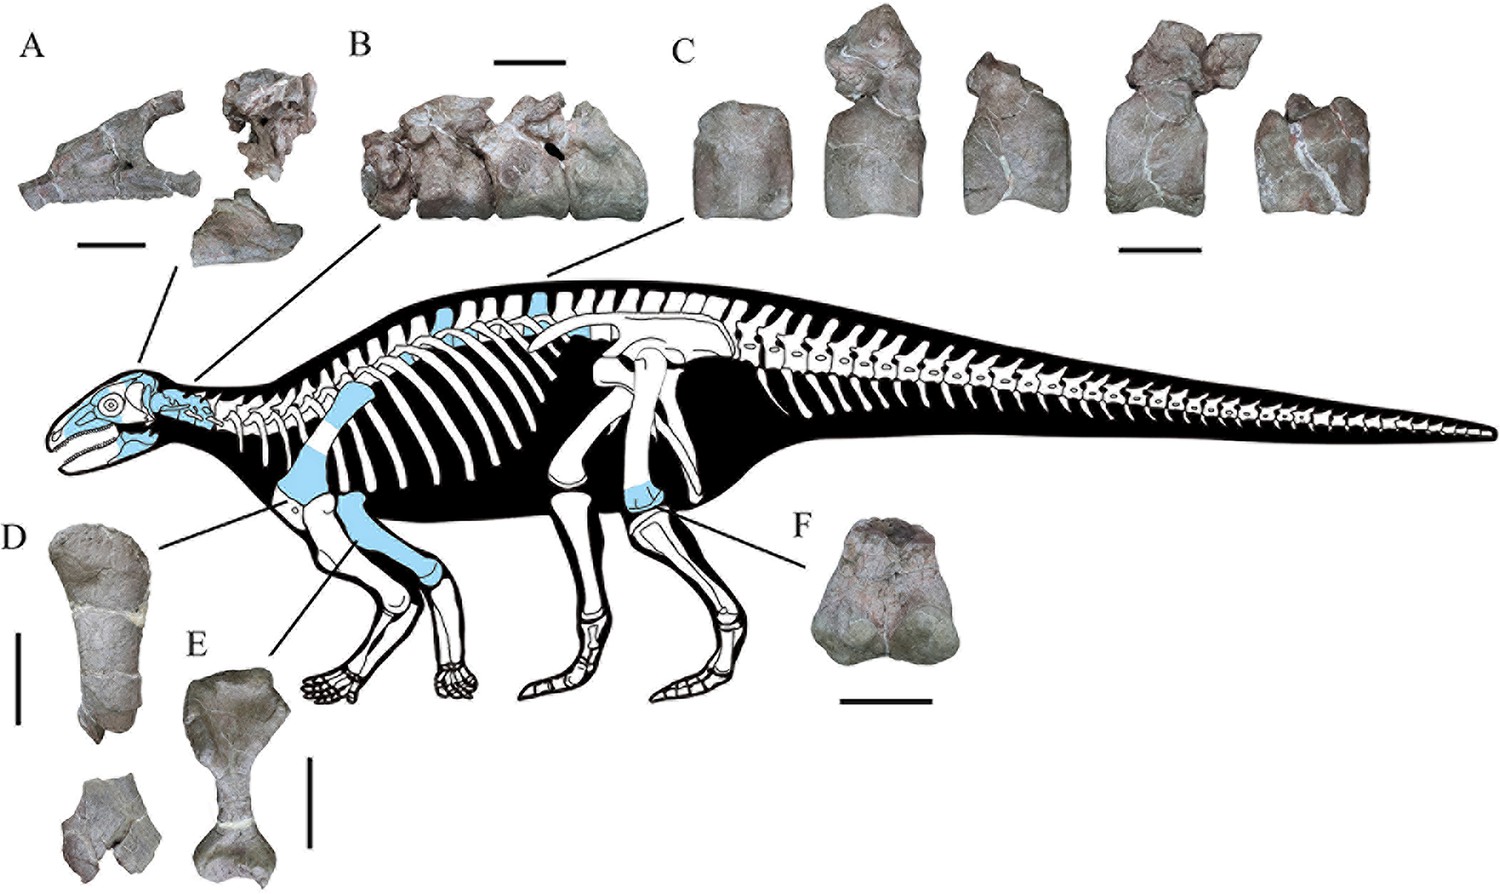 A new early branching armored dinosaur from the Lower Jurassic of 